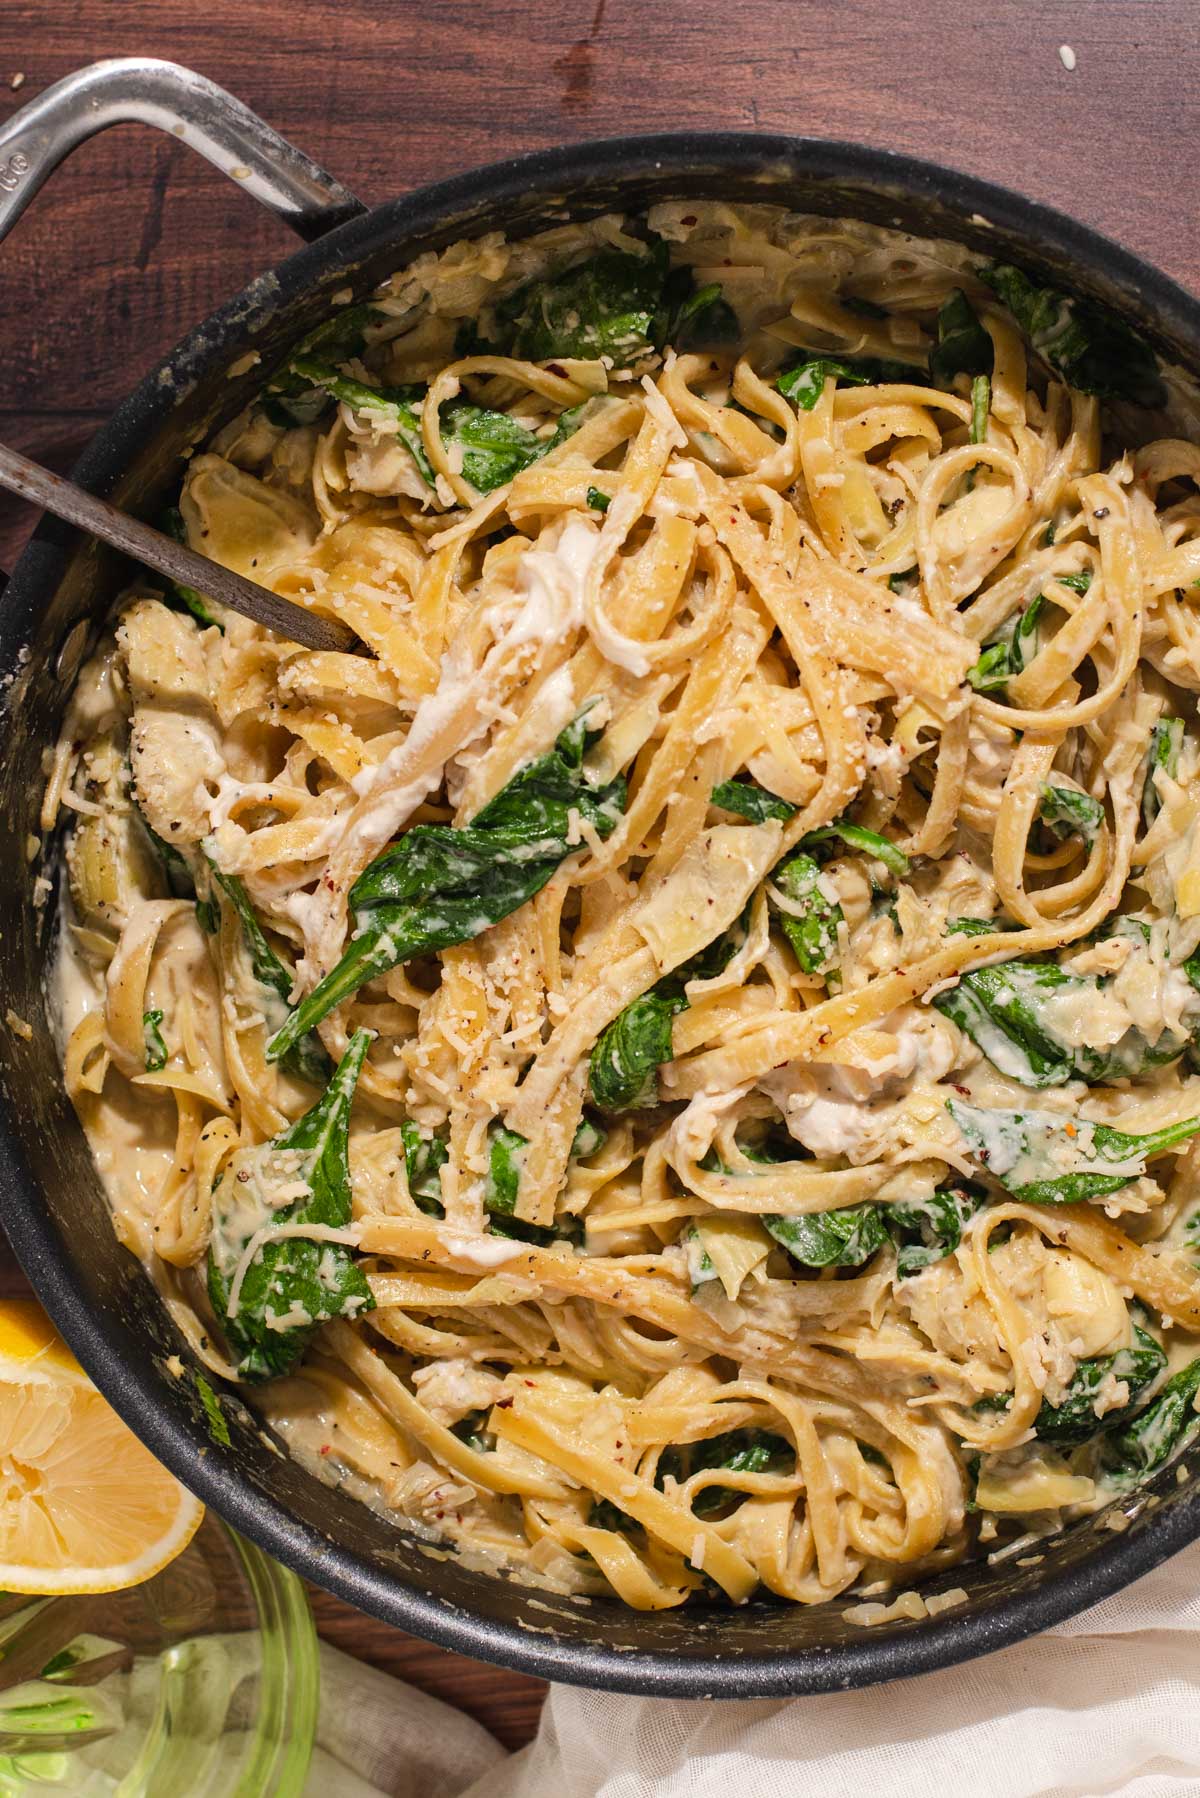 Overhead view of black skillet filled with fettuccine and wilted spinach